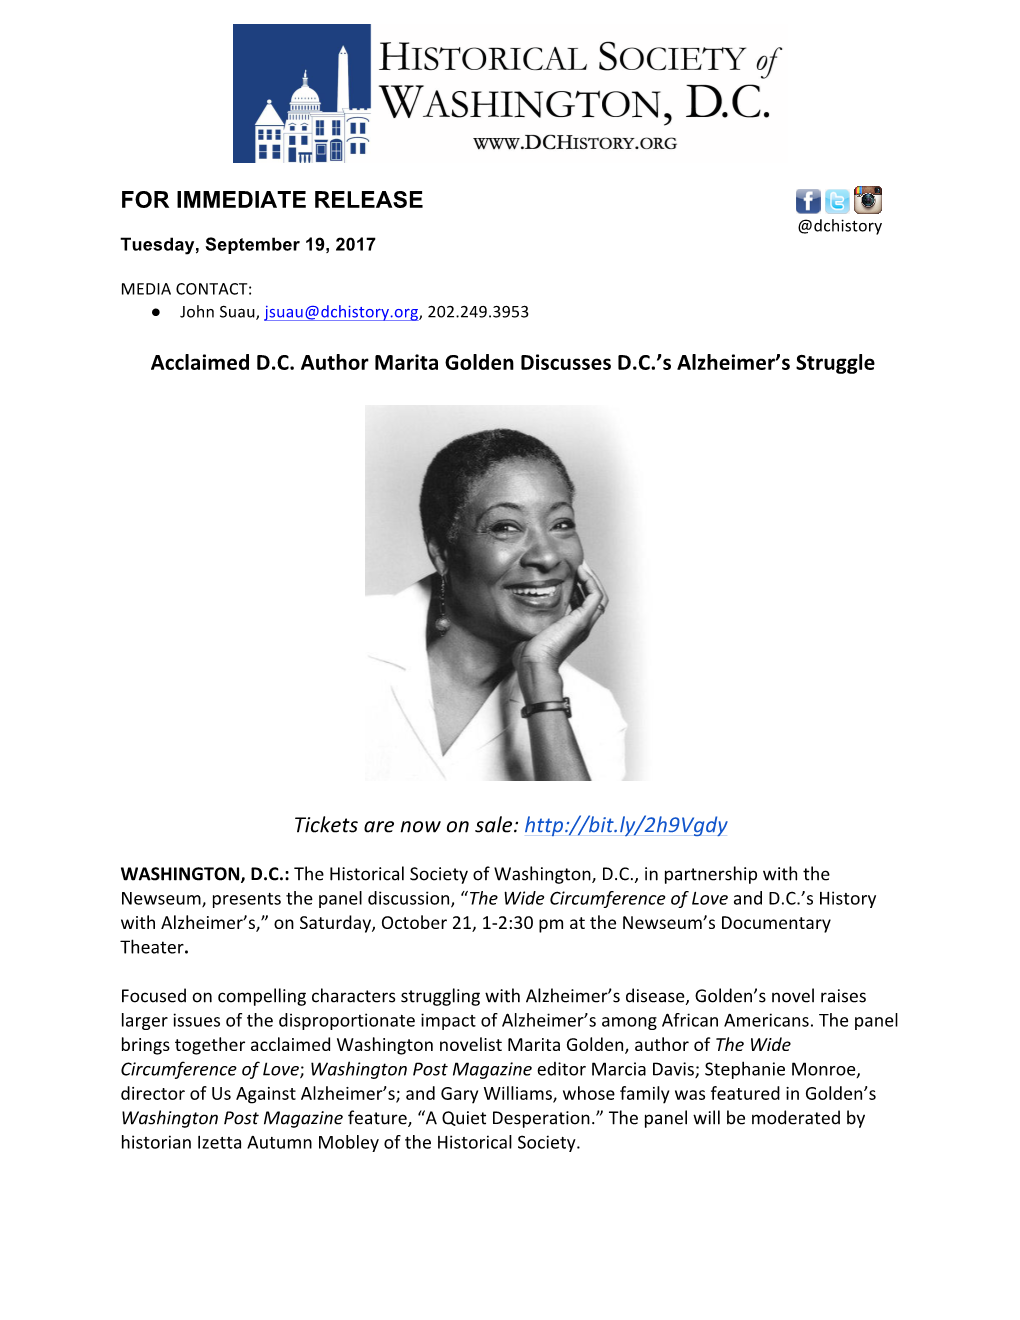 FOR IMMEDIATE RELEASE Acclaimed D.C. Author Marita Golden